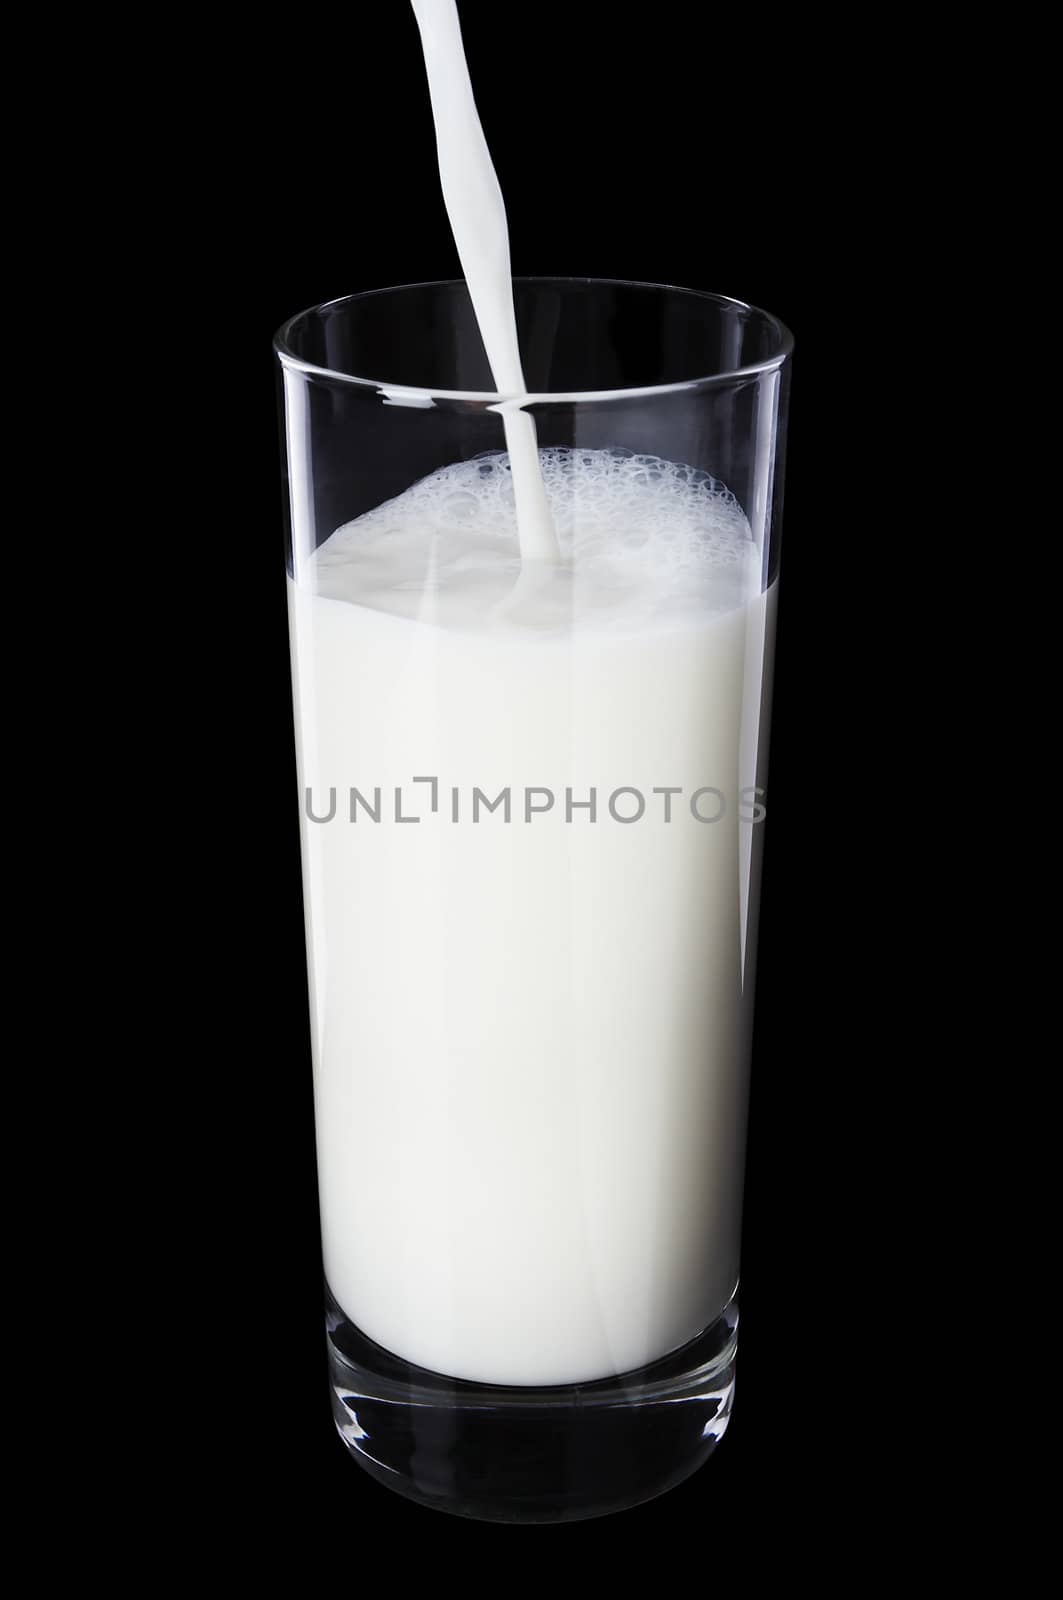 Pouring milk in the glass on black background